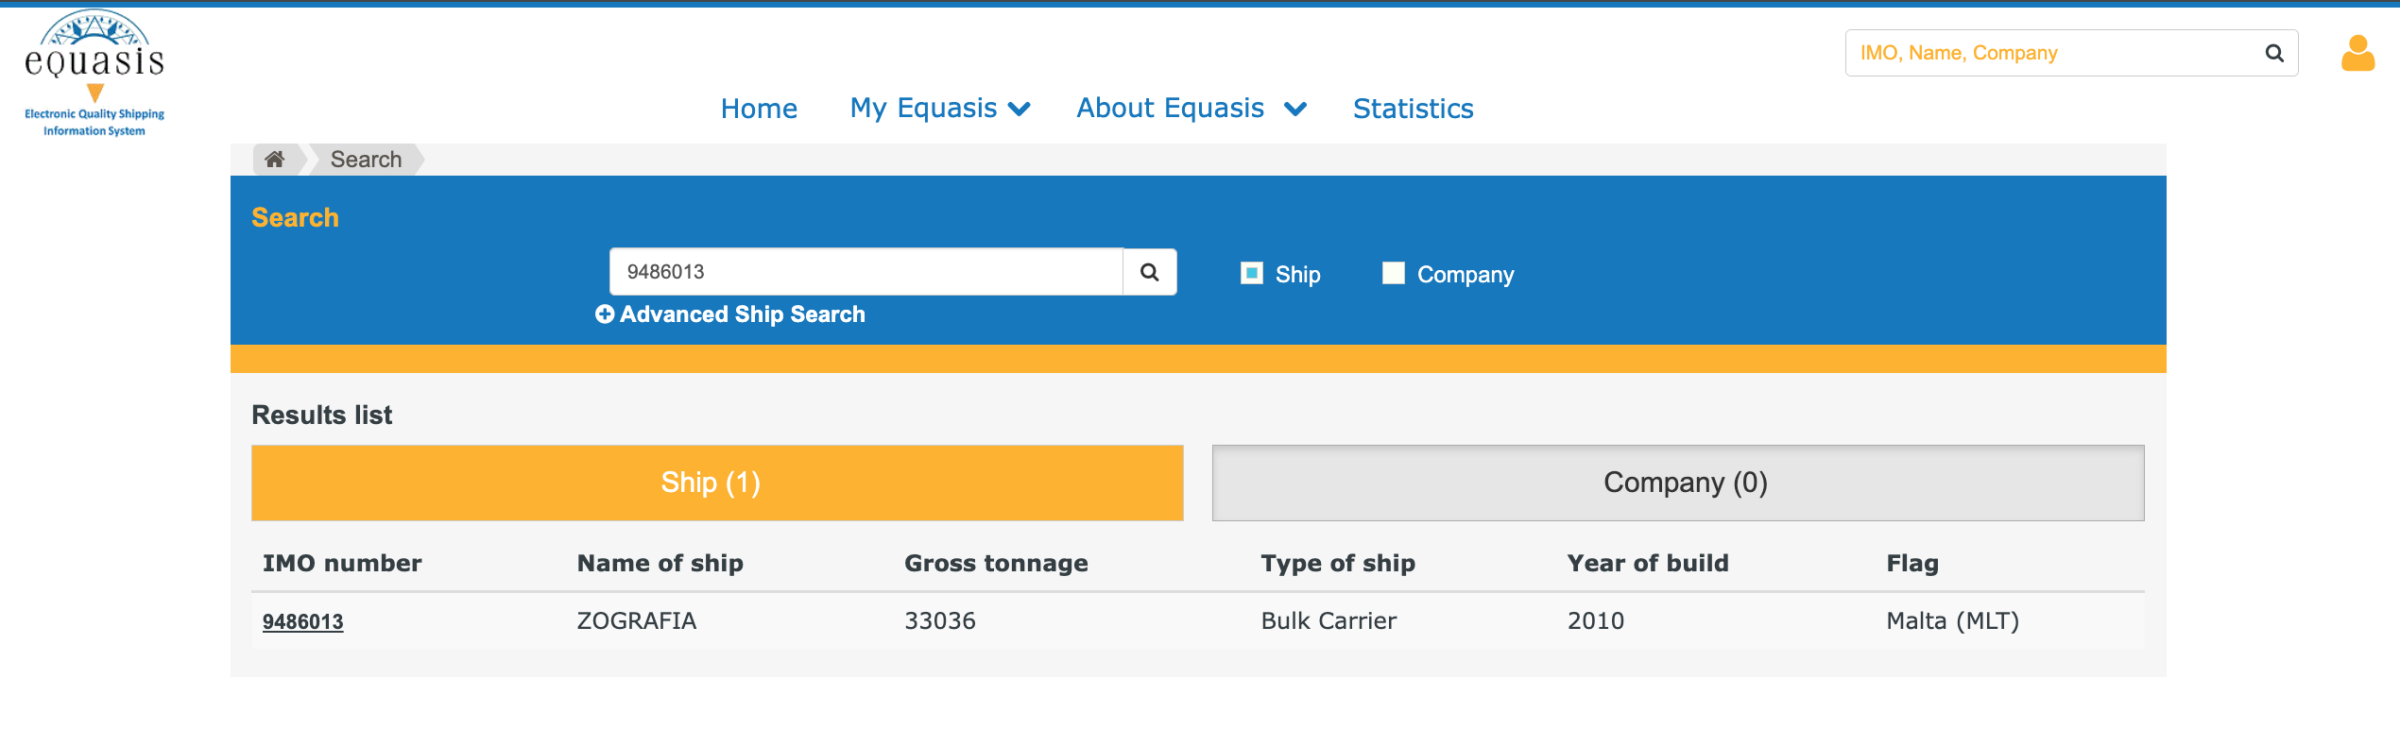 This image is a screenshot from equasis.org. On the left, the IMO number and name of the ship Zografia is shown, while on the right, the type of ship, year of construction and the flag under which it is sailing.